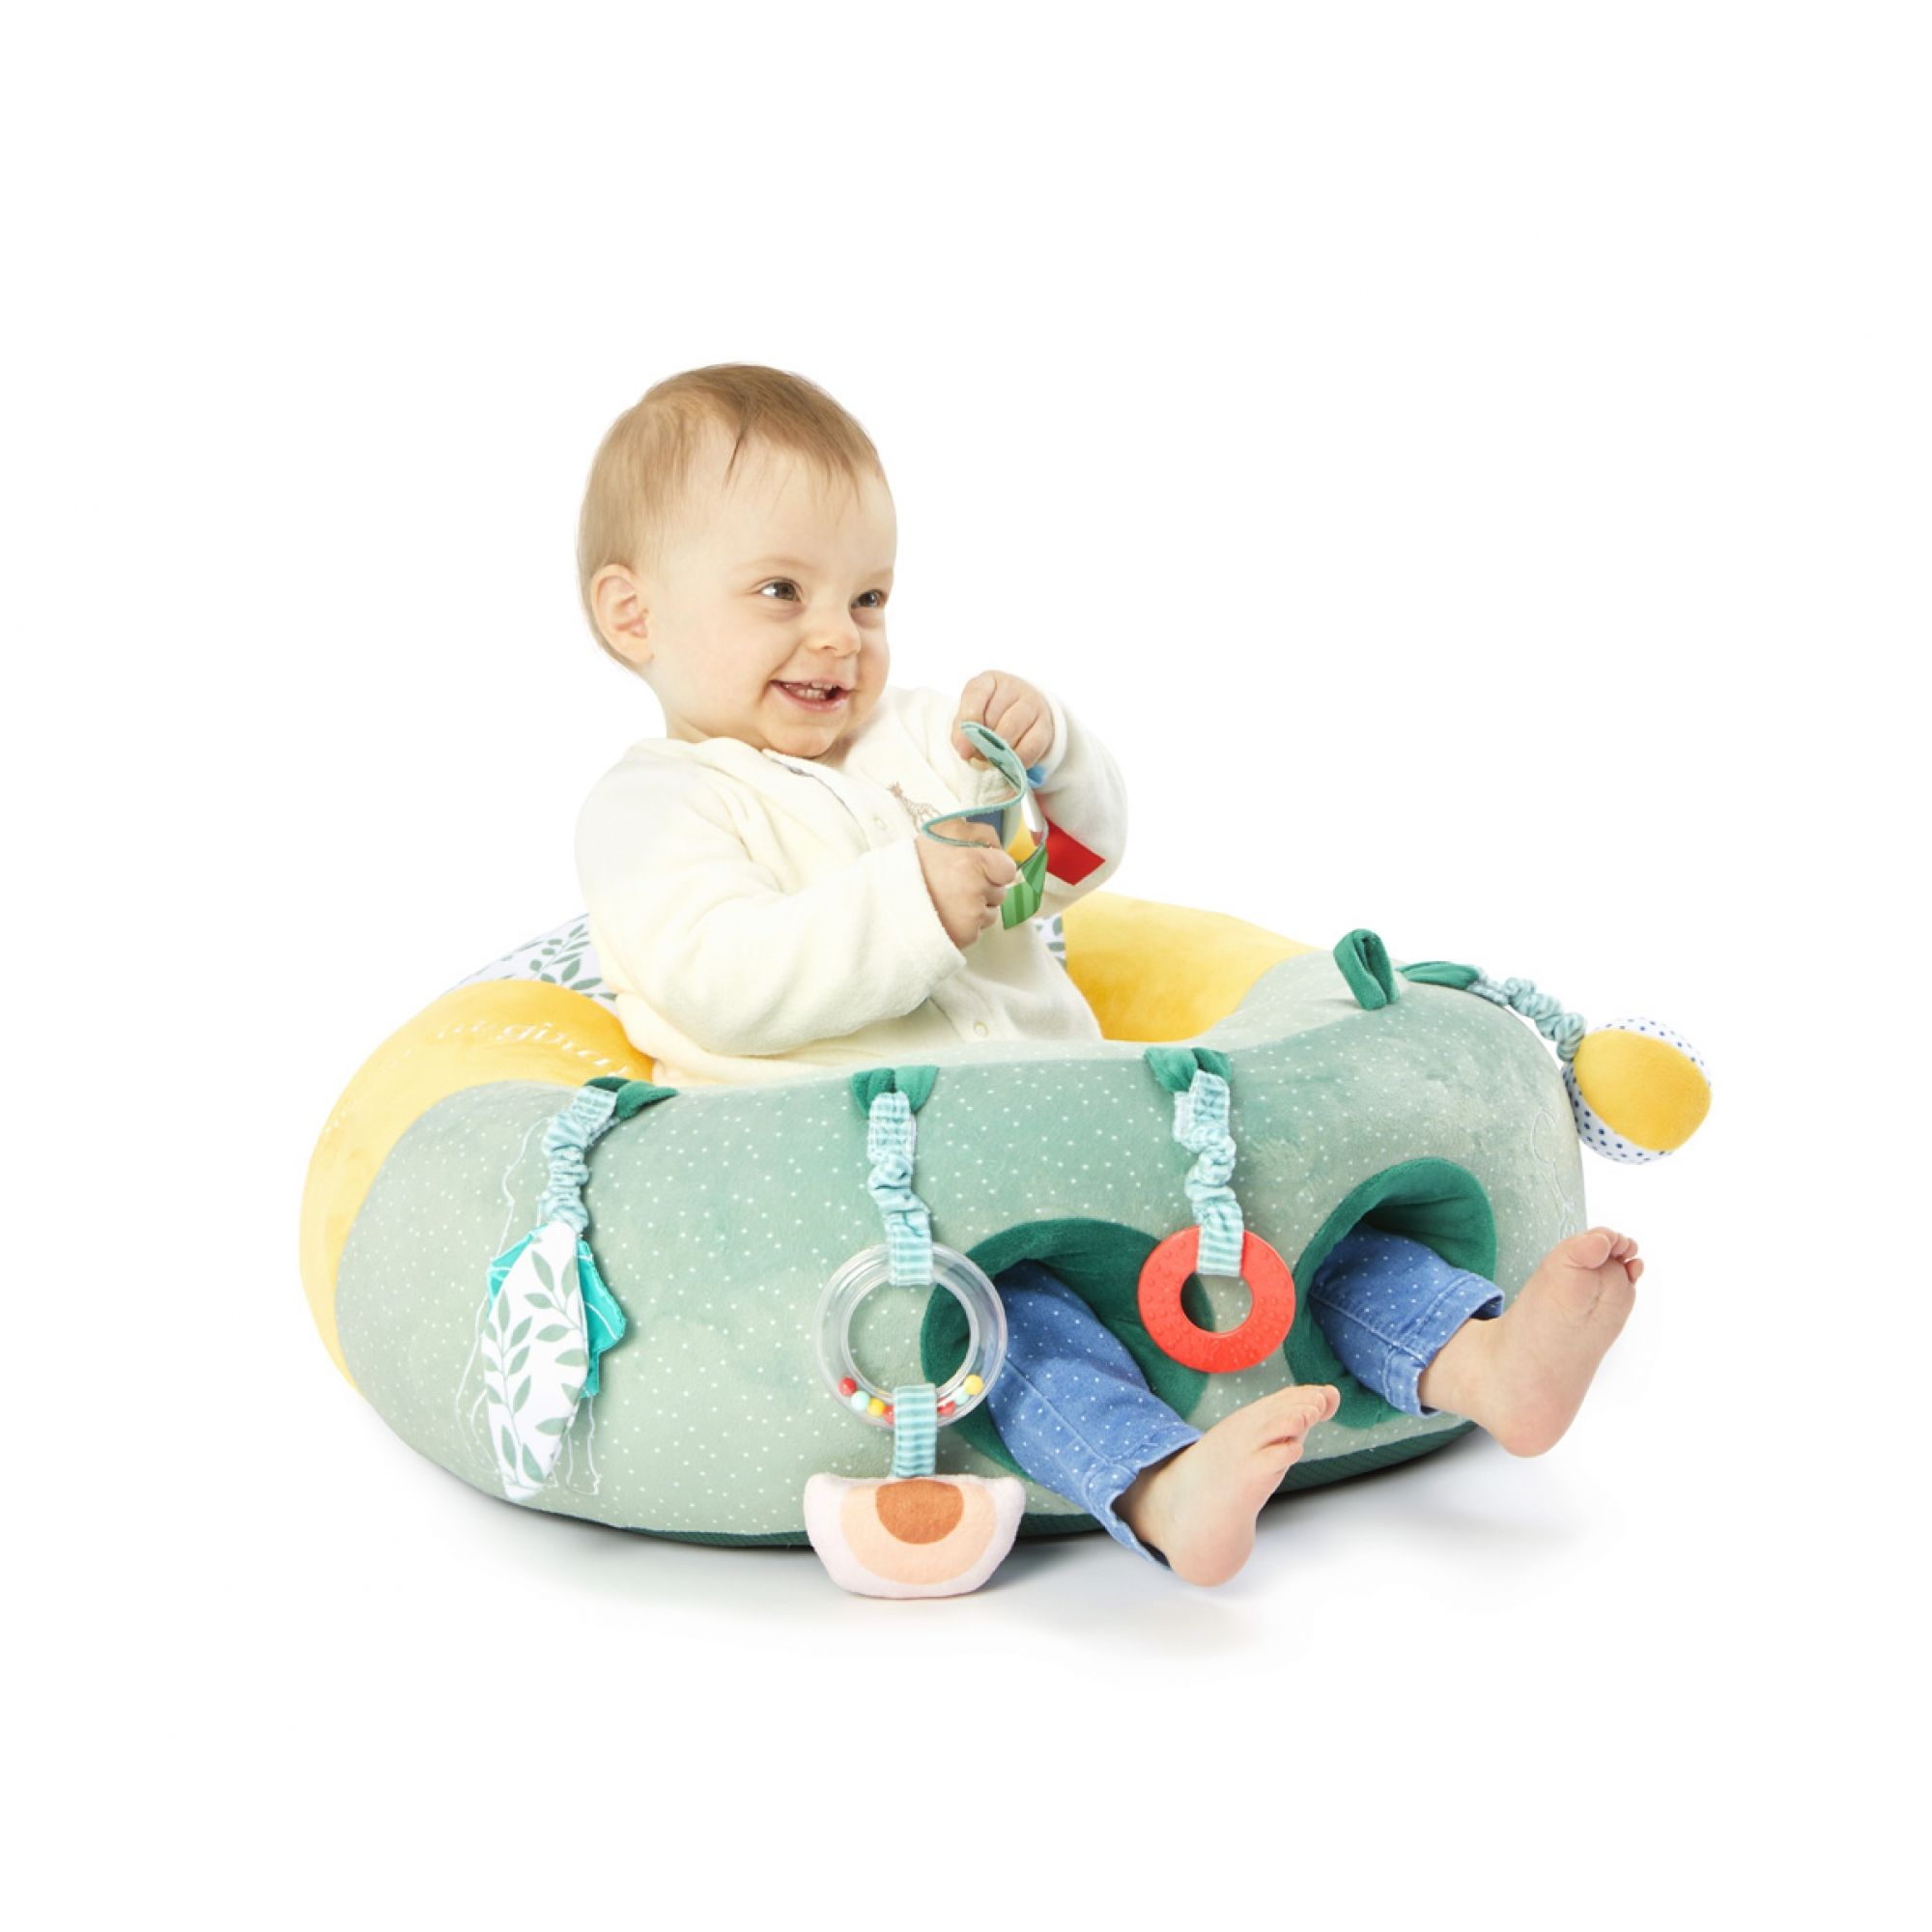 Fauteuil Baby Seat & Play Sophie la girafe - Made in Bébé